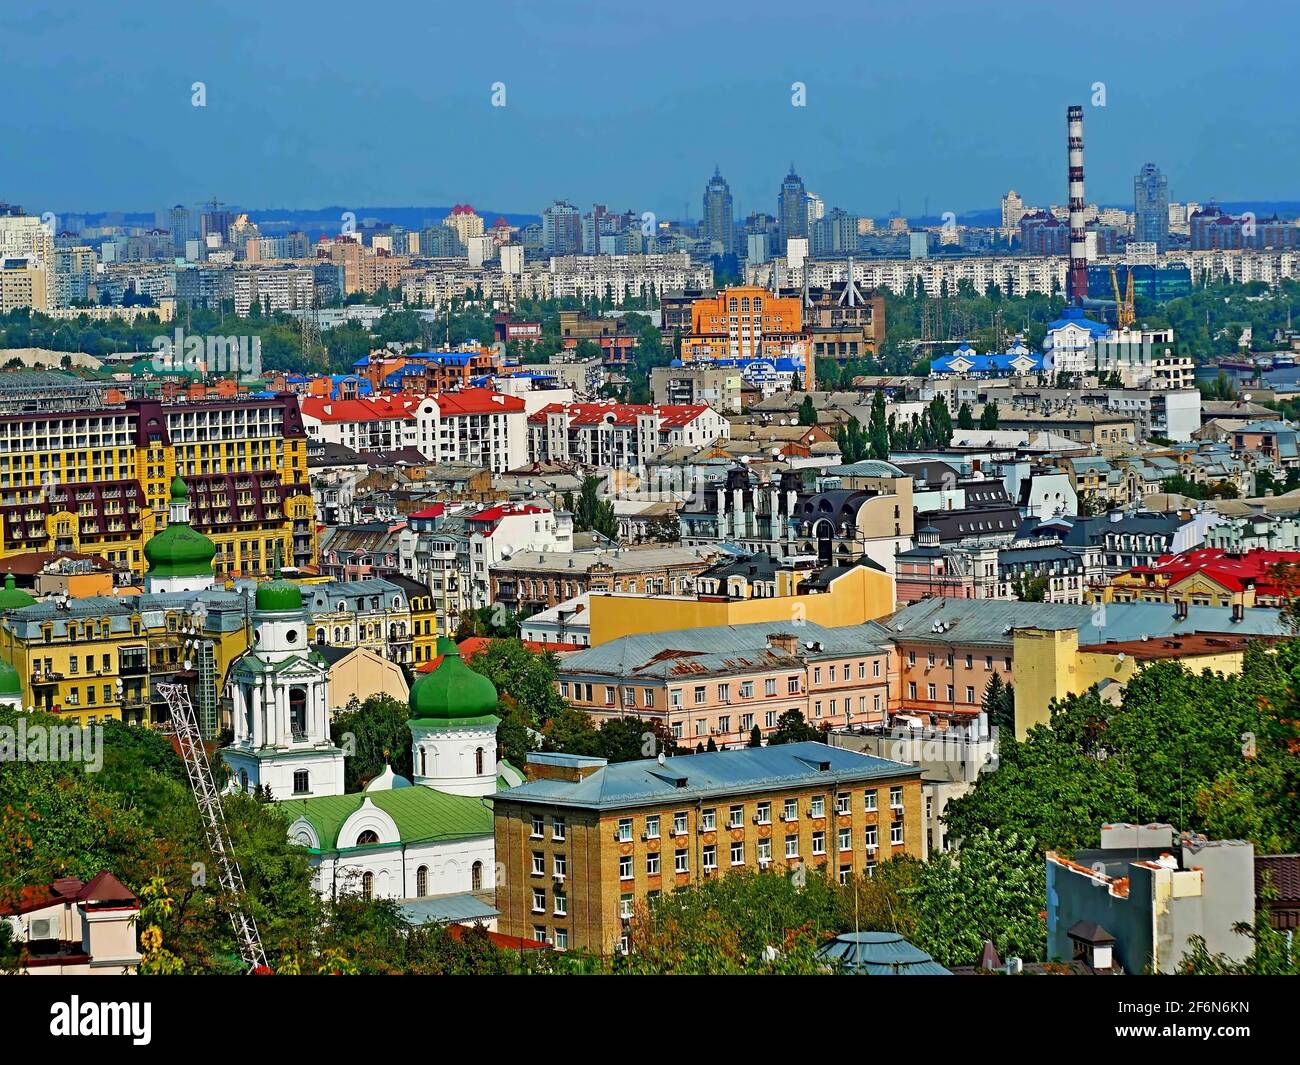 City of Kyiv in sunny summer day, cityscape captured with a long-focus lens Stock Photo